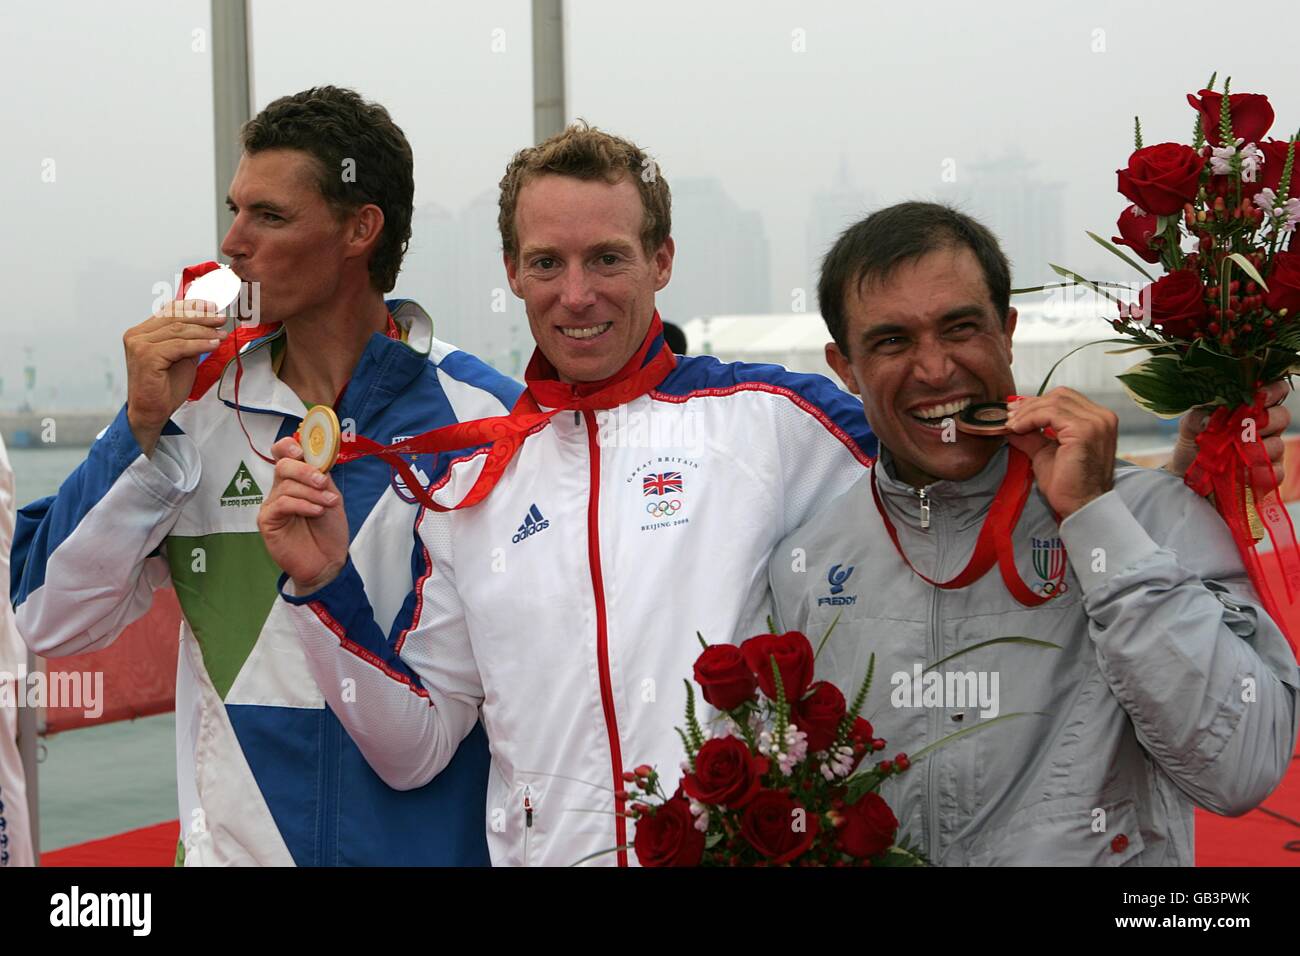 Britain's gold medalist Paul Goodison (center) is flanked by silver medalist Slovenia's Vasilij Zbogar (left) and bronze medalist Italy's Diego Romero Stock Photo